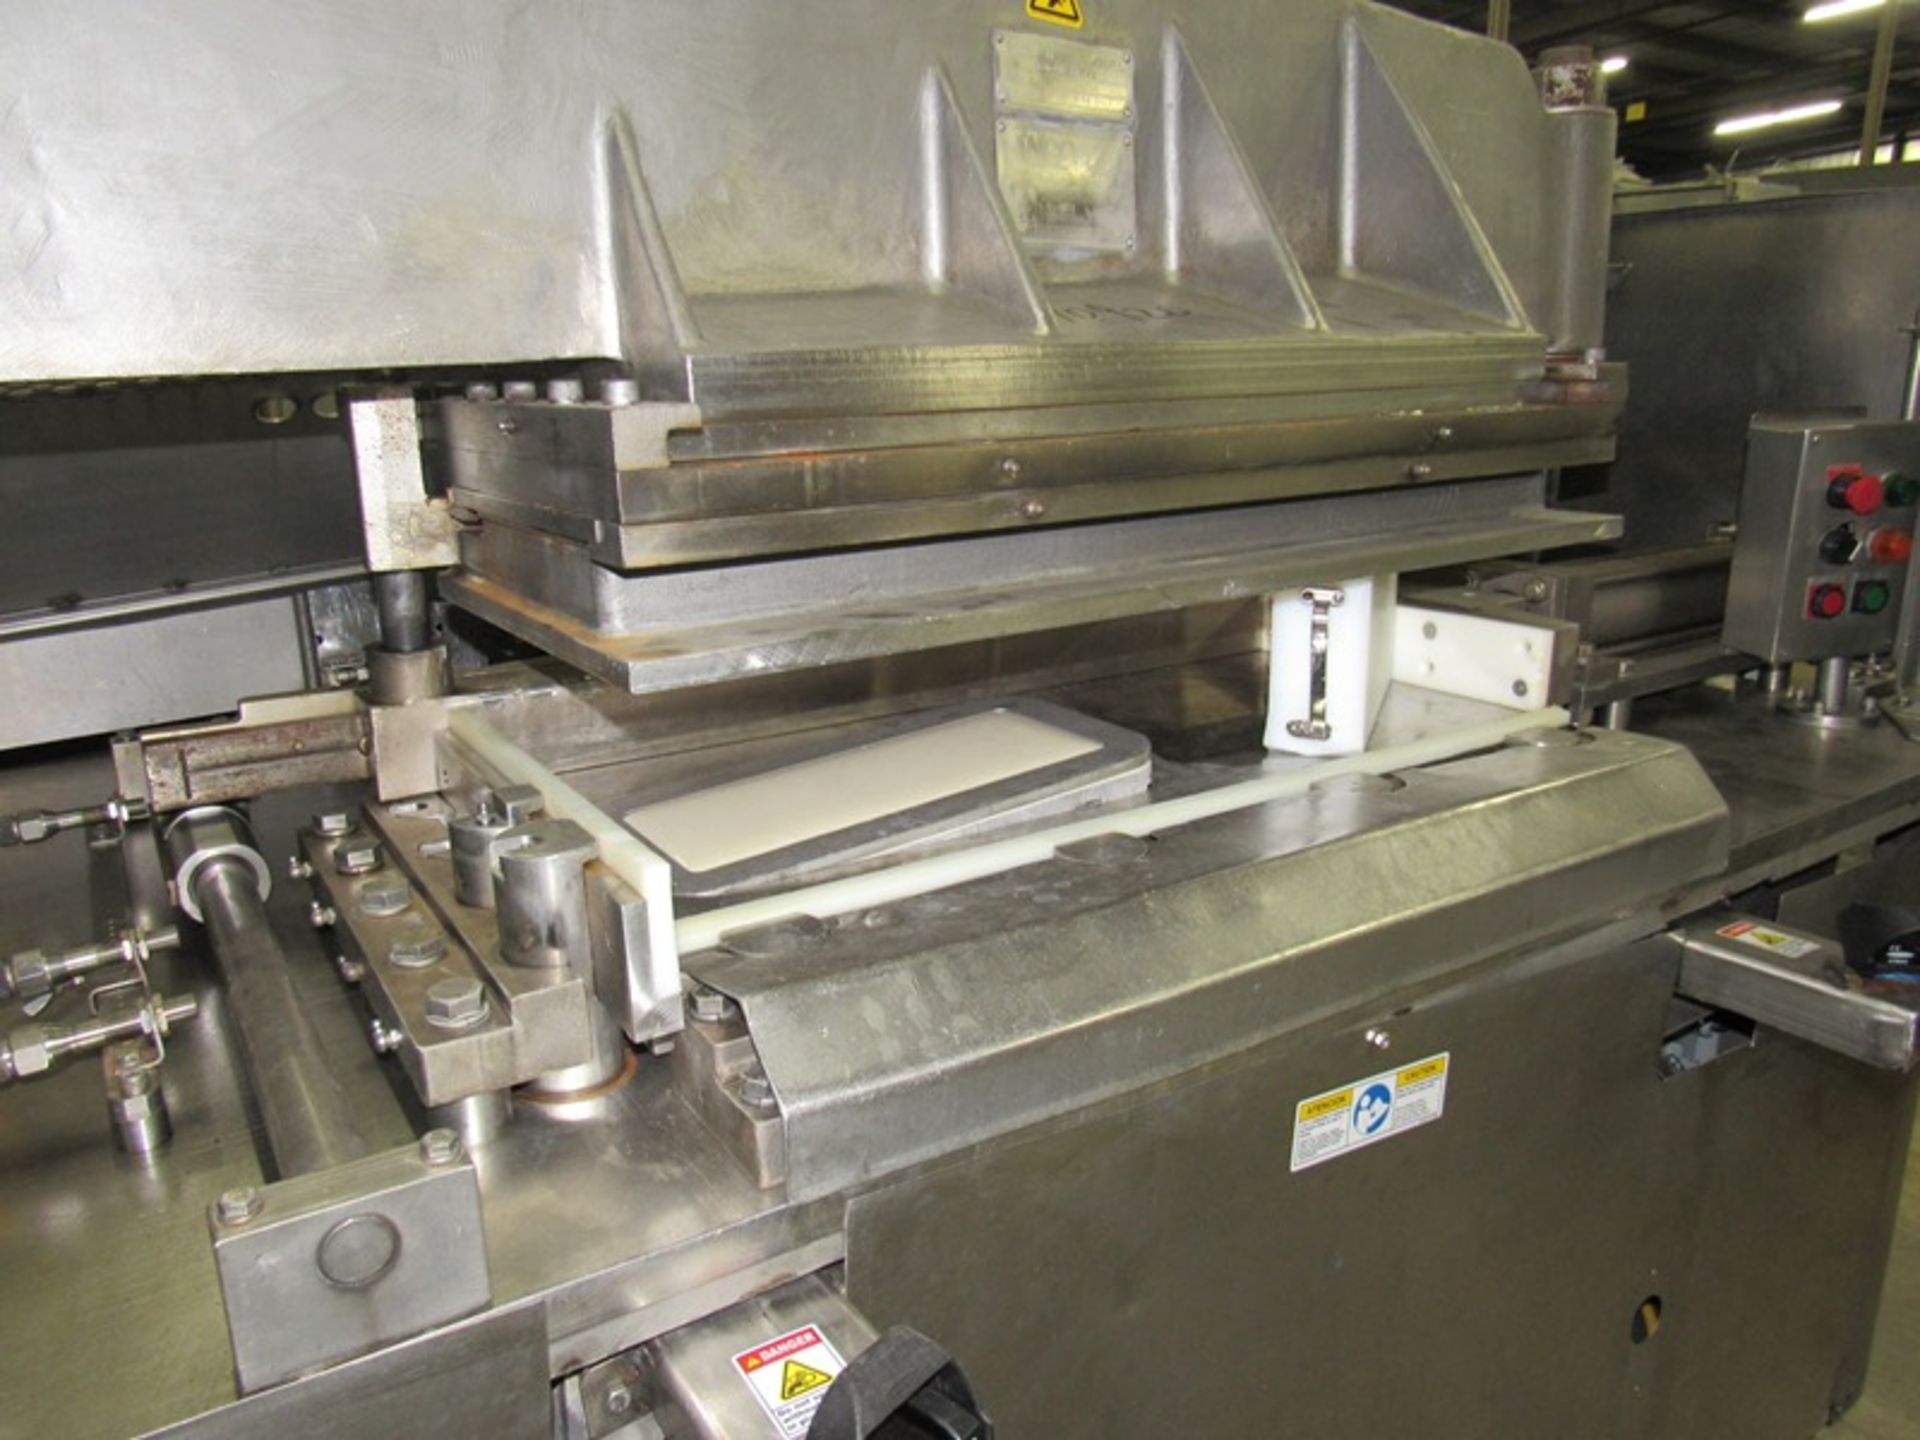 Anco Mdl. 1411 Bacon Press designed to press uniform thickness and width to maximize slicing yields, - Image 6 of 16